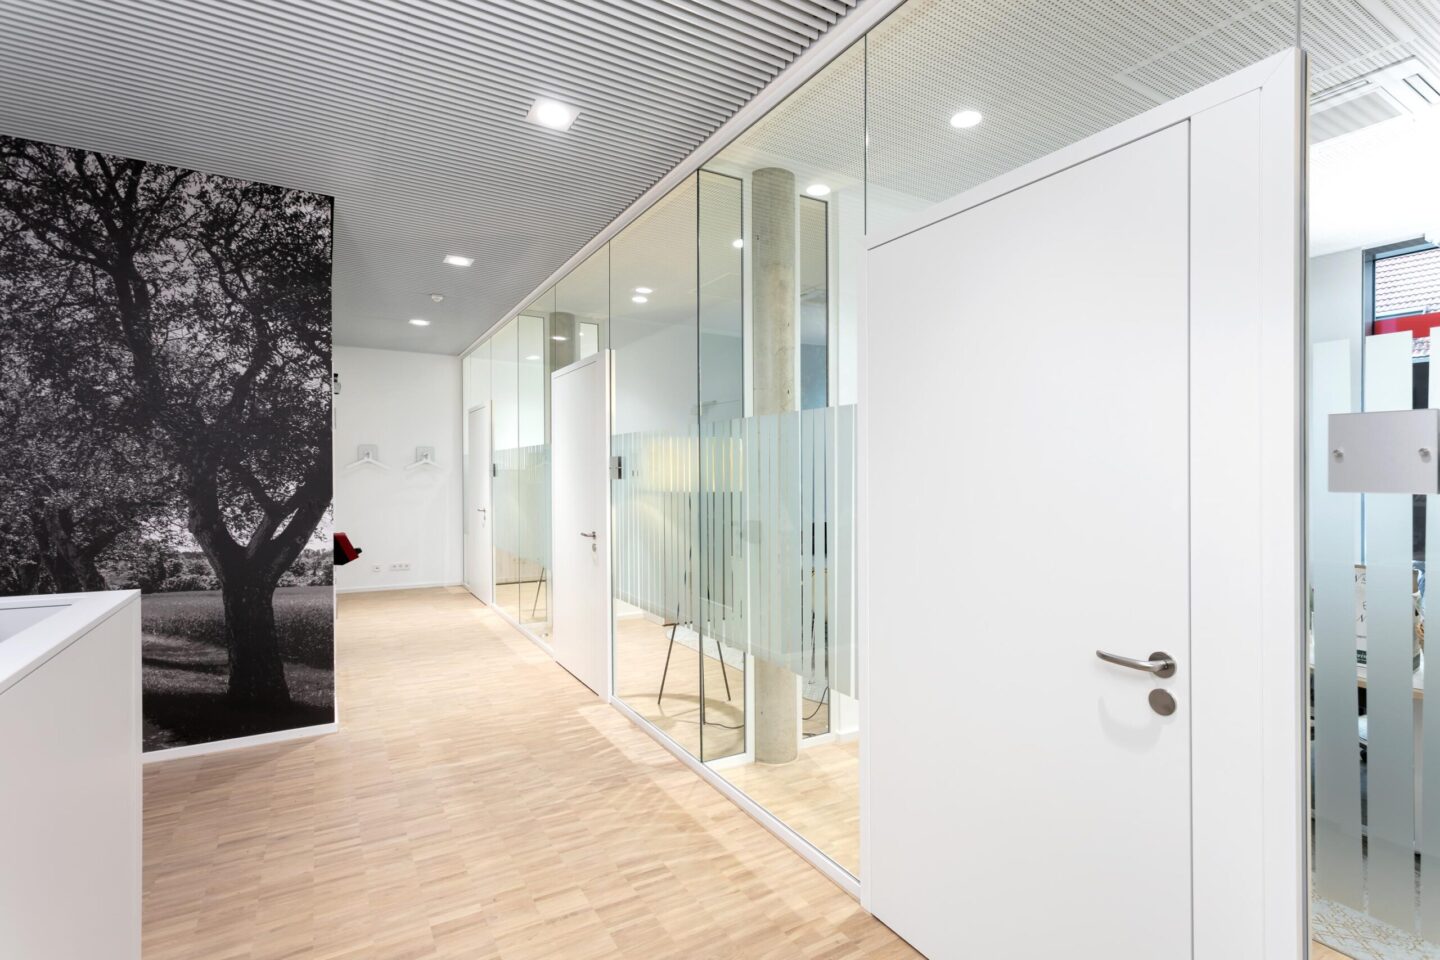 Sparkasse-Blankenloch │ all-glass construction │ office partitions